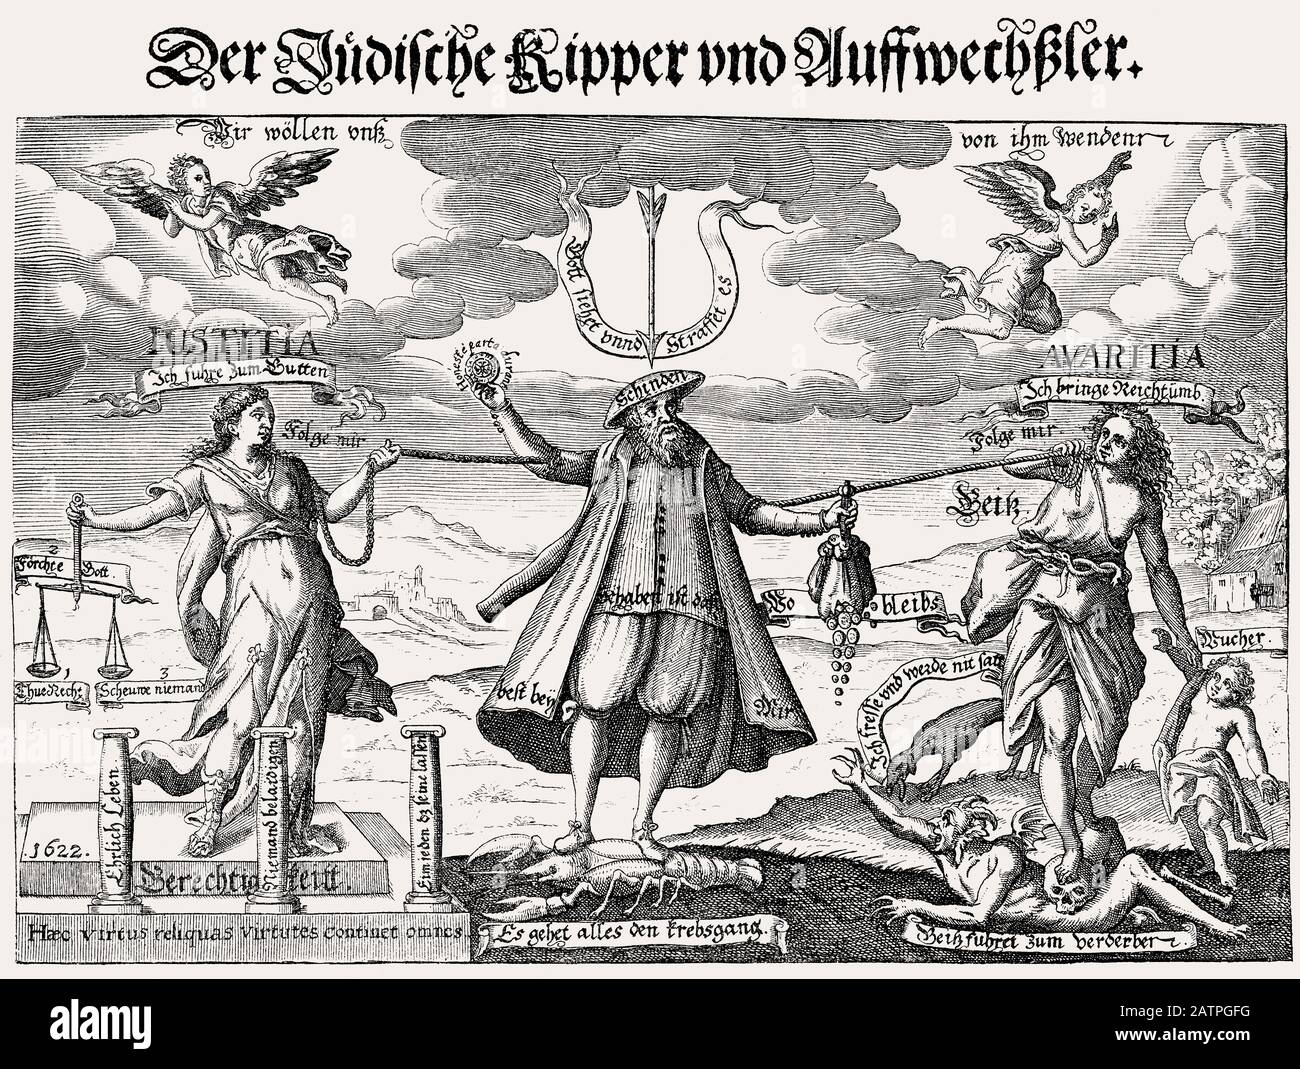 antisemitic progaganda on the Tipper and See-saw or Kipper und Wipper, German Financial Meltdown of 1621-23 Stock Photo